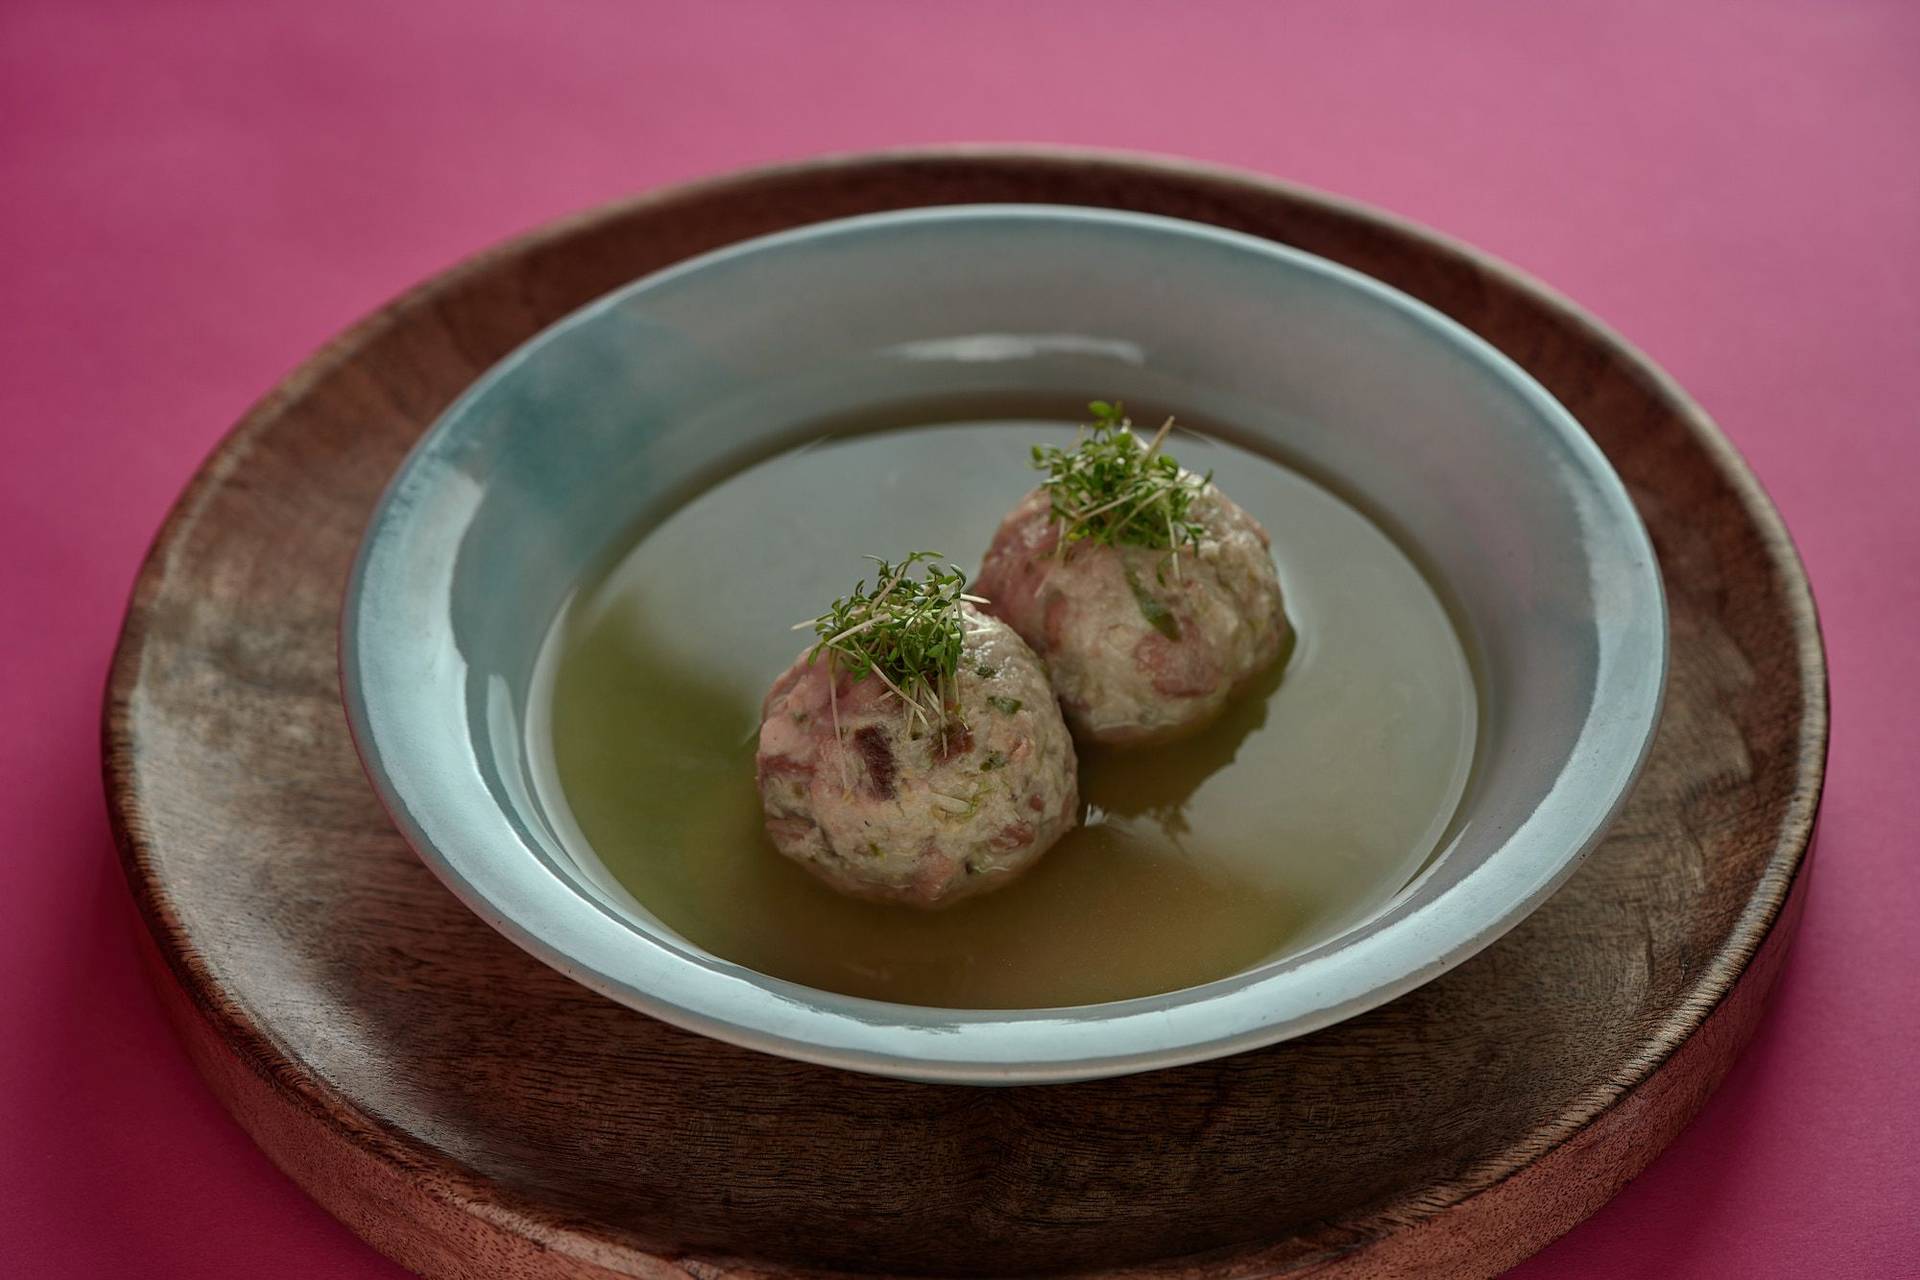 vegan bread dumplings with brussels sprouts and vegetable broth on a turquoise plate with pink background